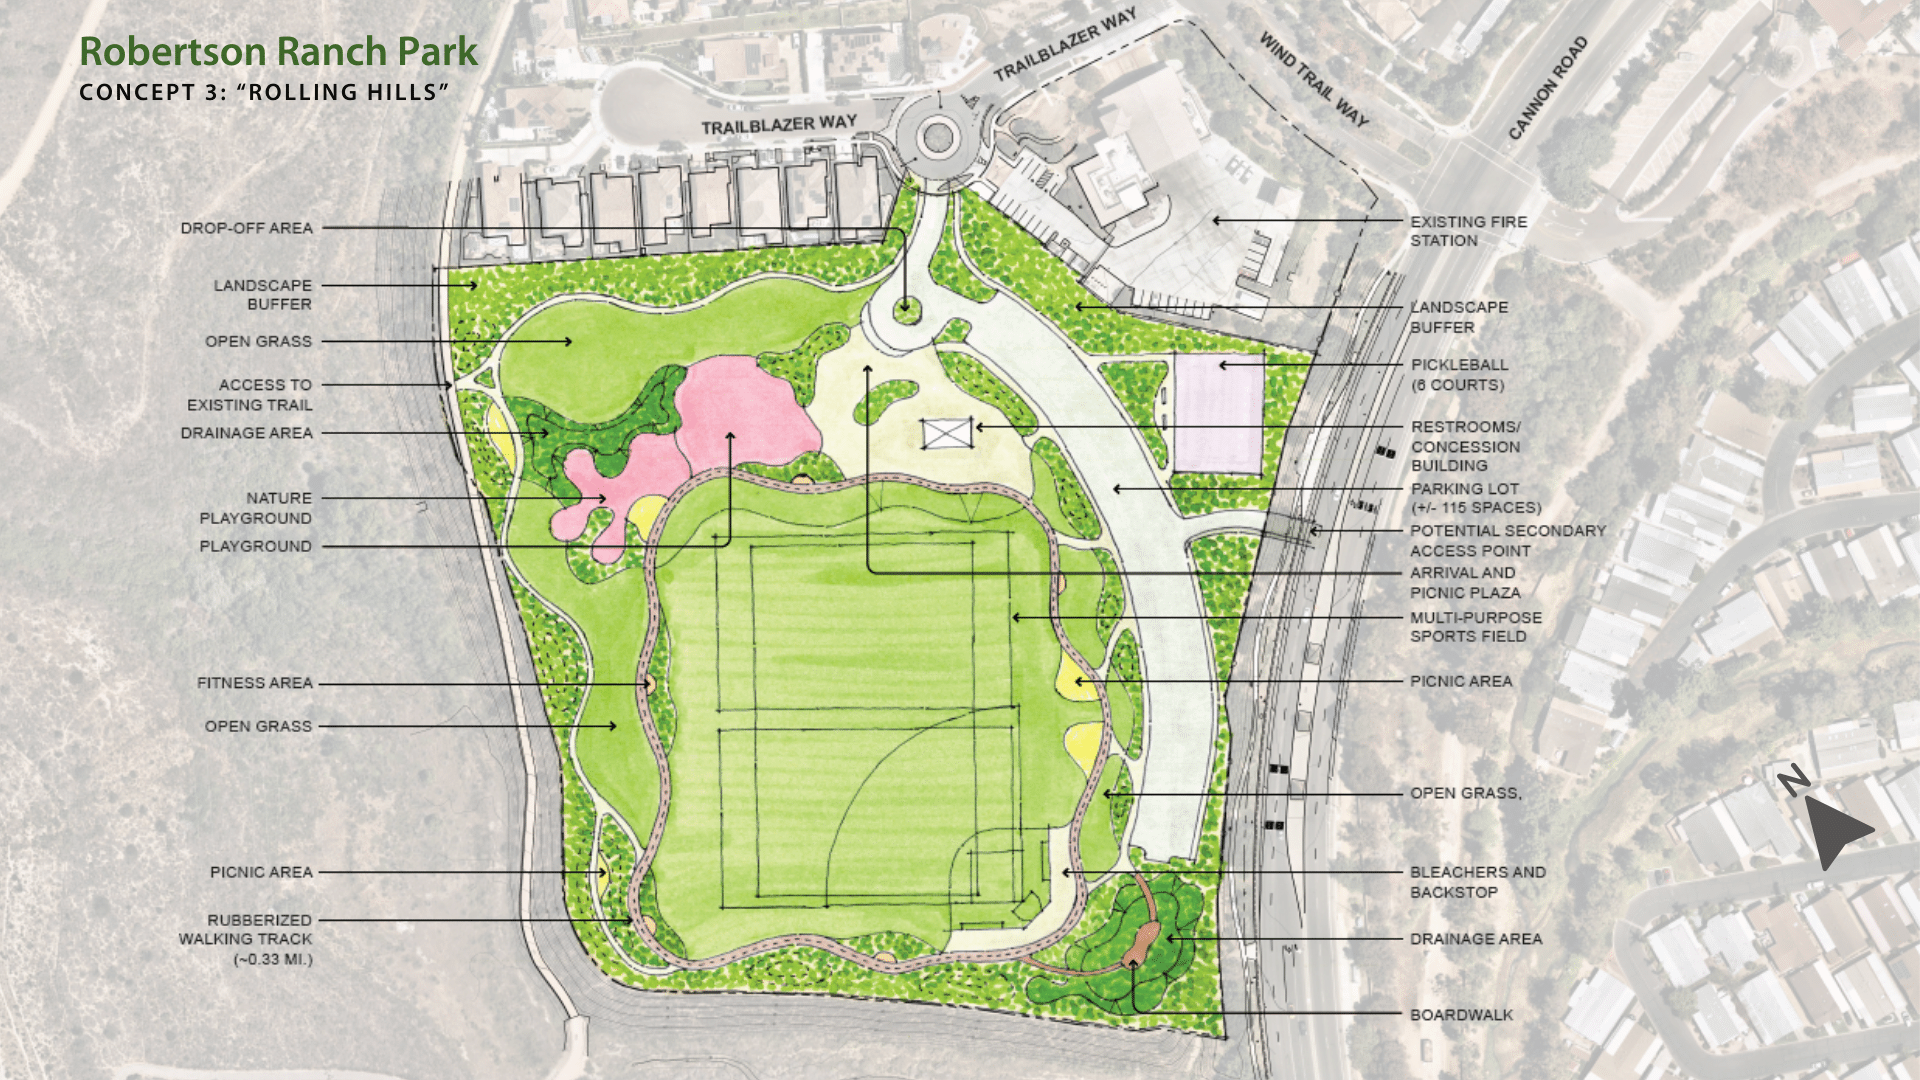 A detailed drawing shows all of the features and amenities of the Rolling Hills park design concept.